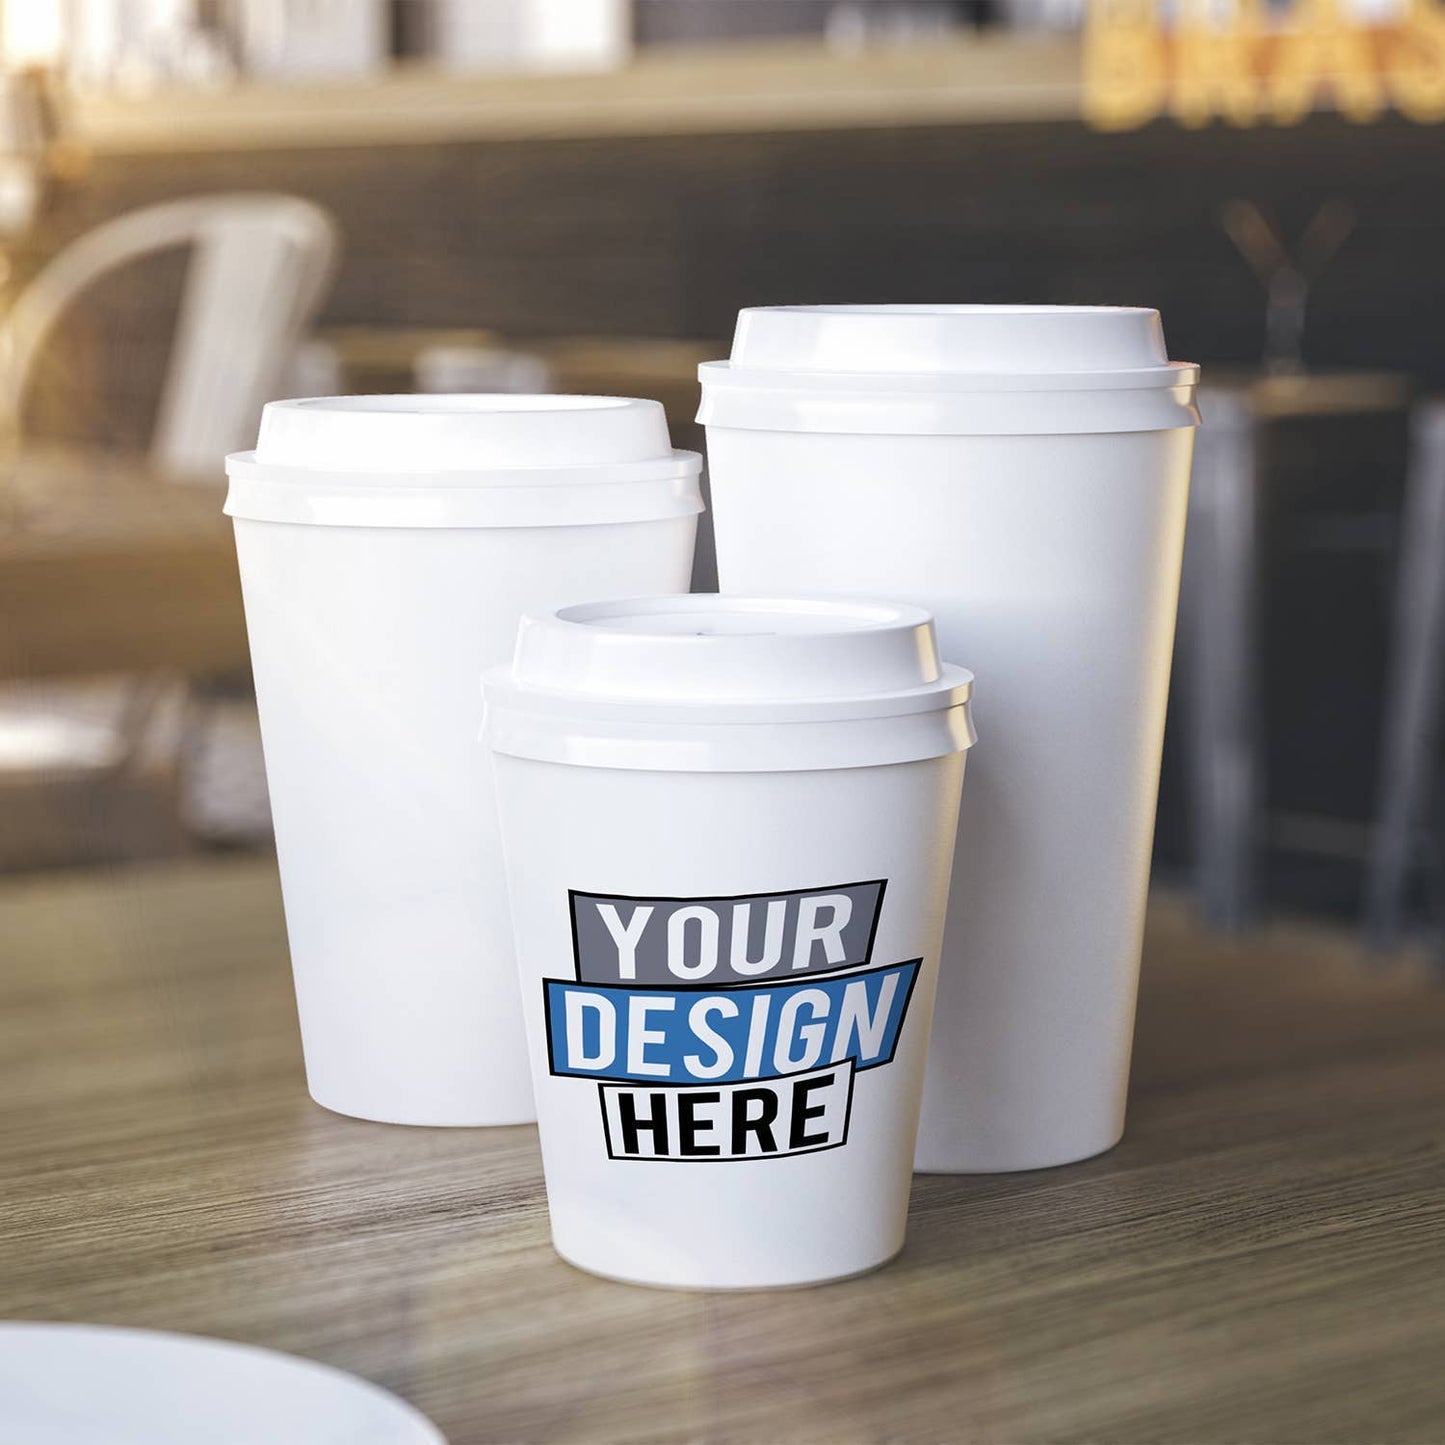 Disposable coffee cups for serving hot coffee, tea, hot chocolate, and other hot beverages. Polyethylene lining for resistance to leaking and moisture penetration.